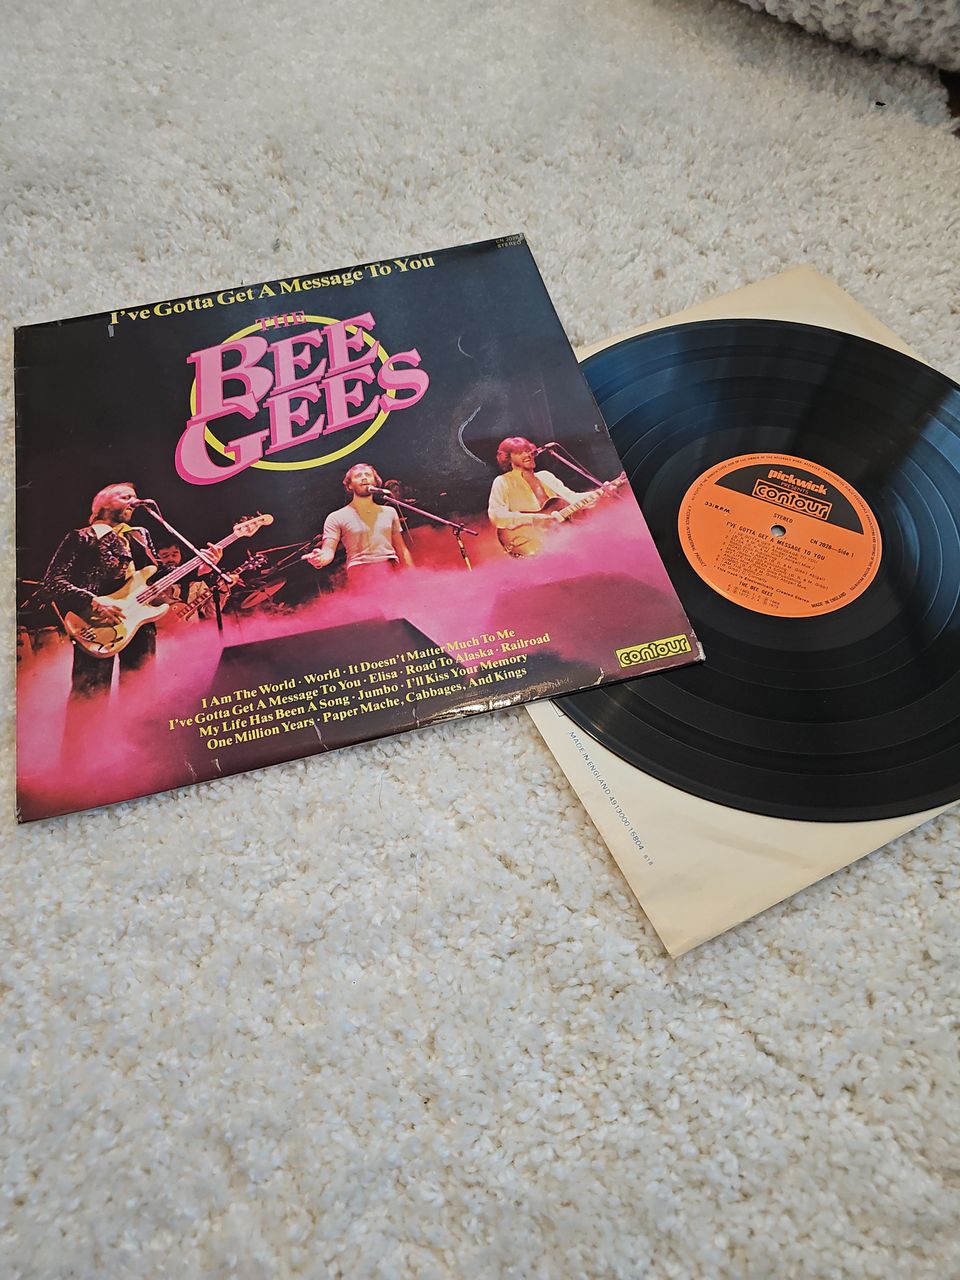 The Bee Gees ilves gotta get a message to you vinyylilevy.